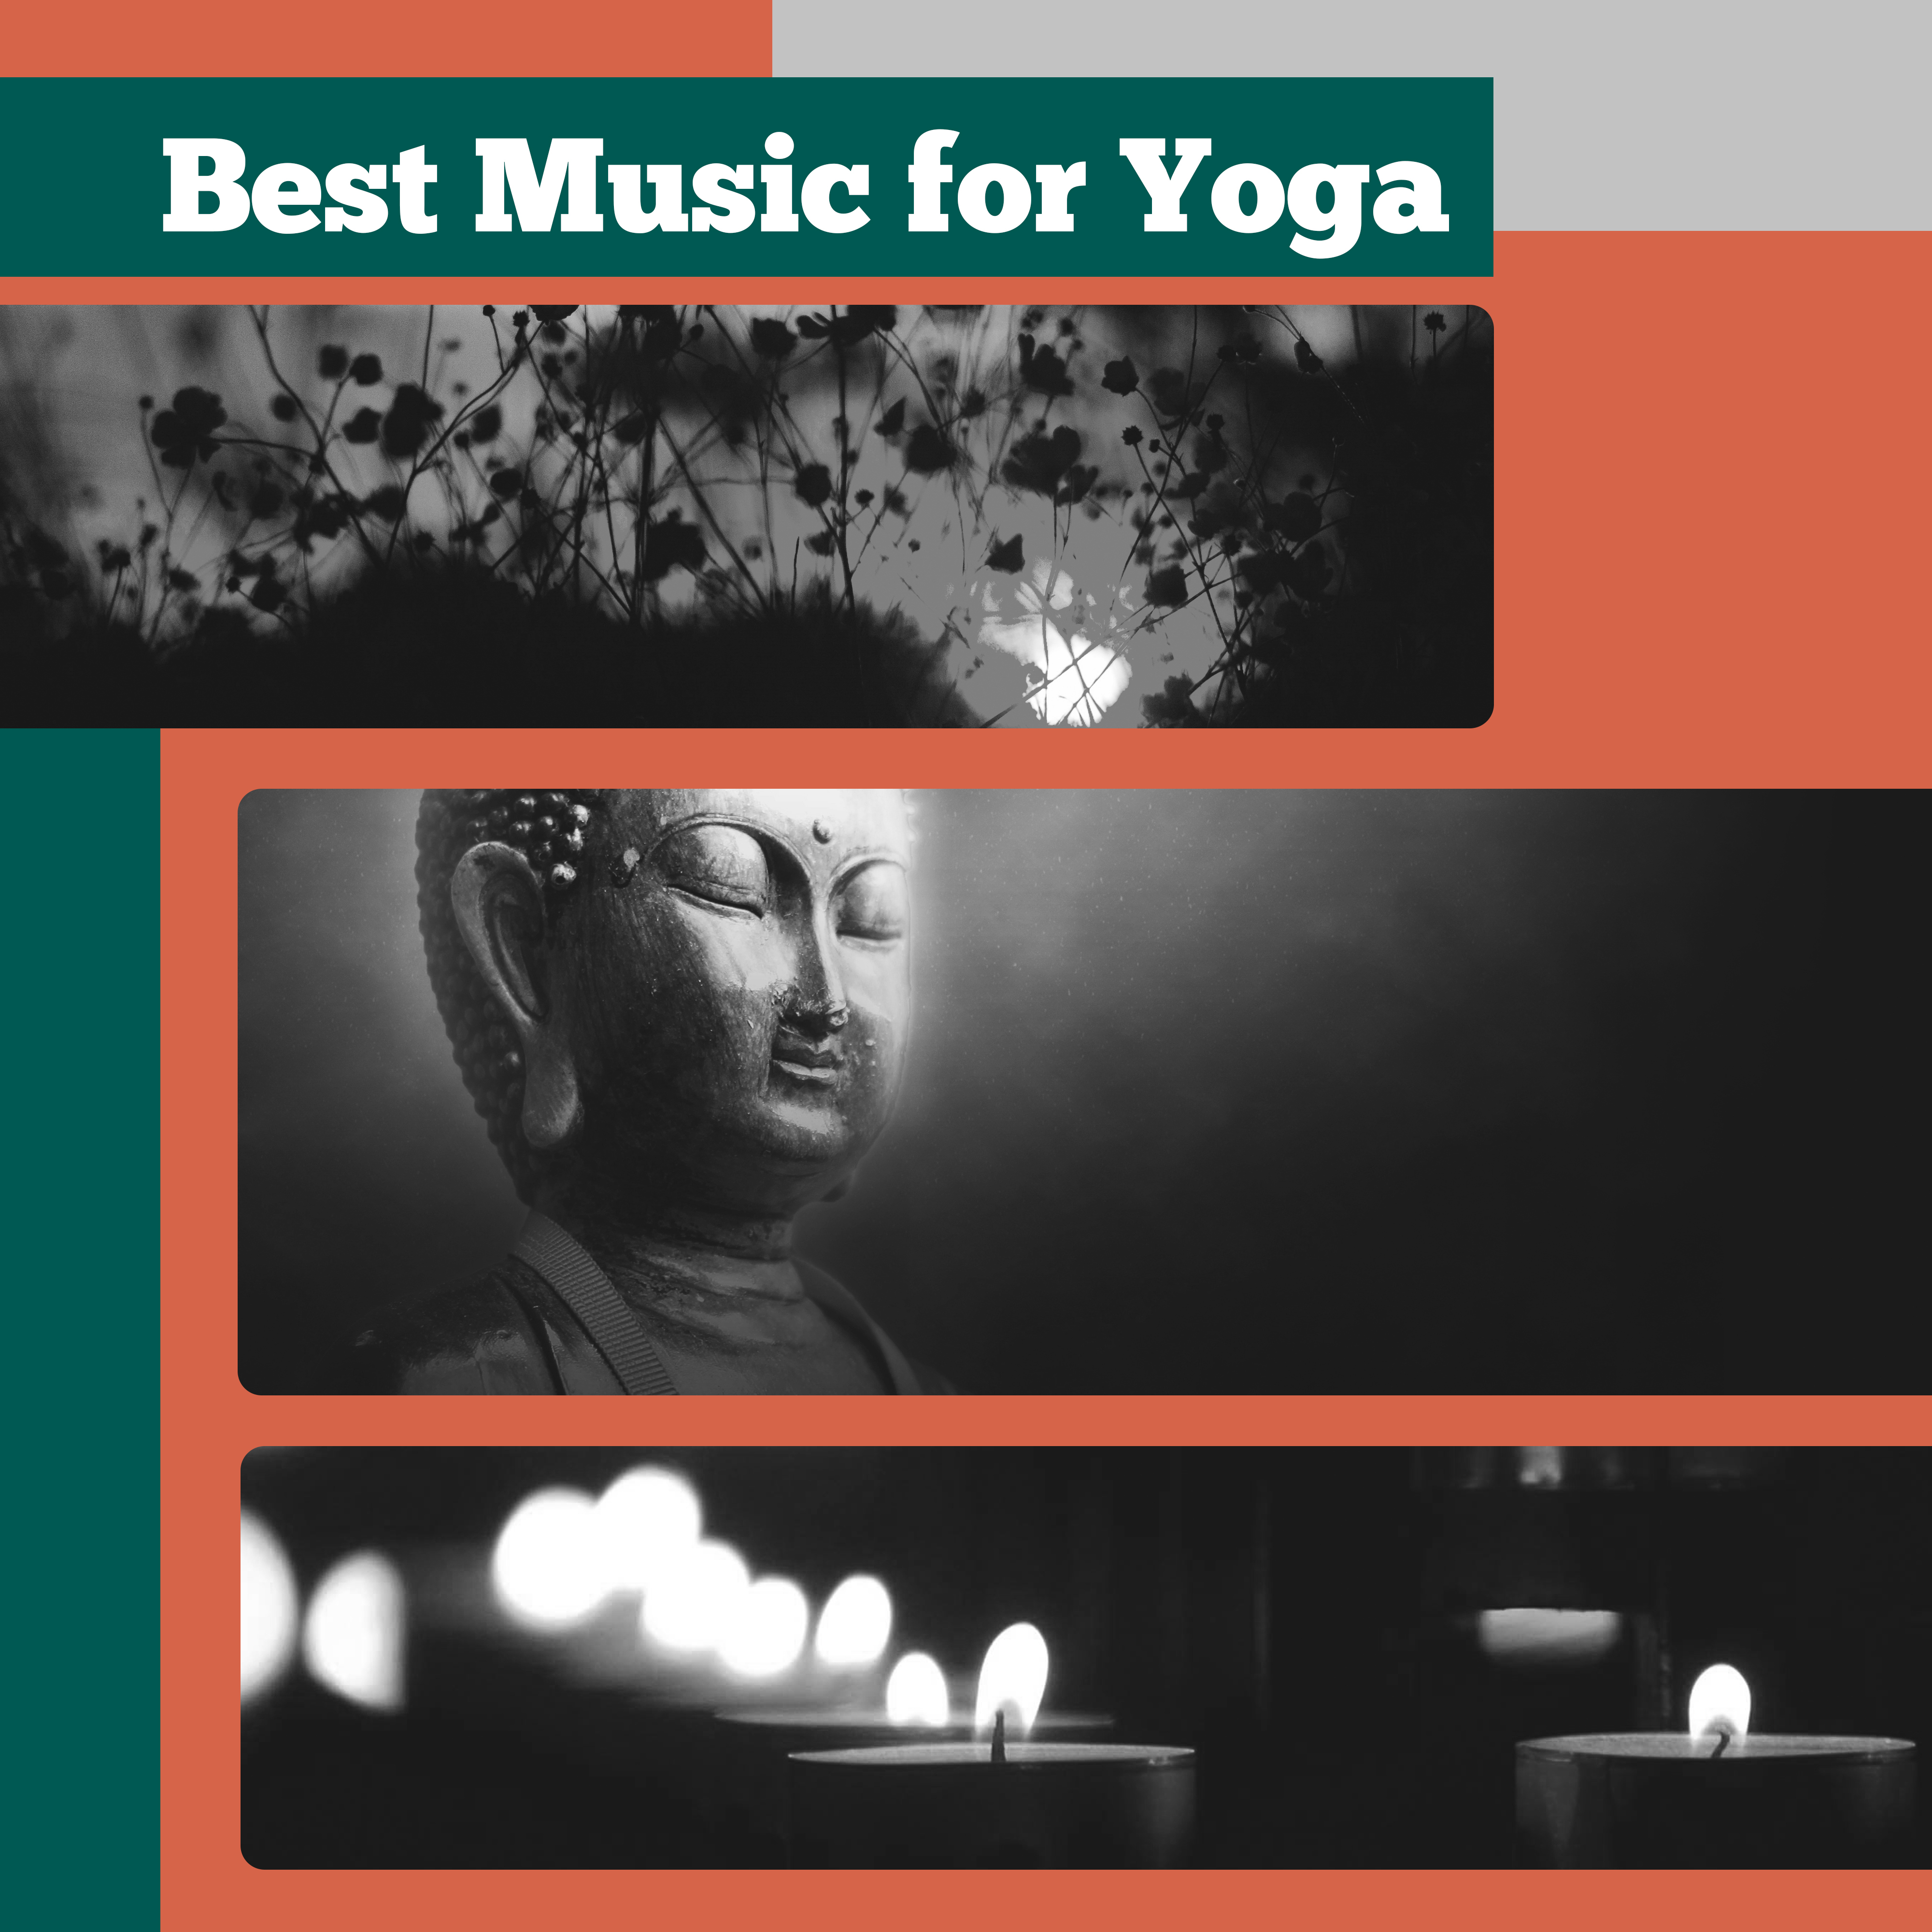 Best Music for Yoga – Nature Sounds for Deep Meditation, Yoga, Relaxing Music, Greatest Music for Pilates, Yoga